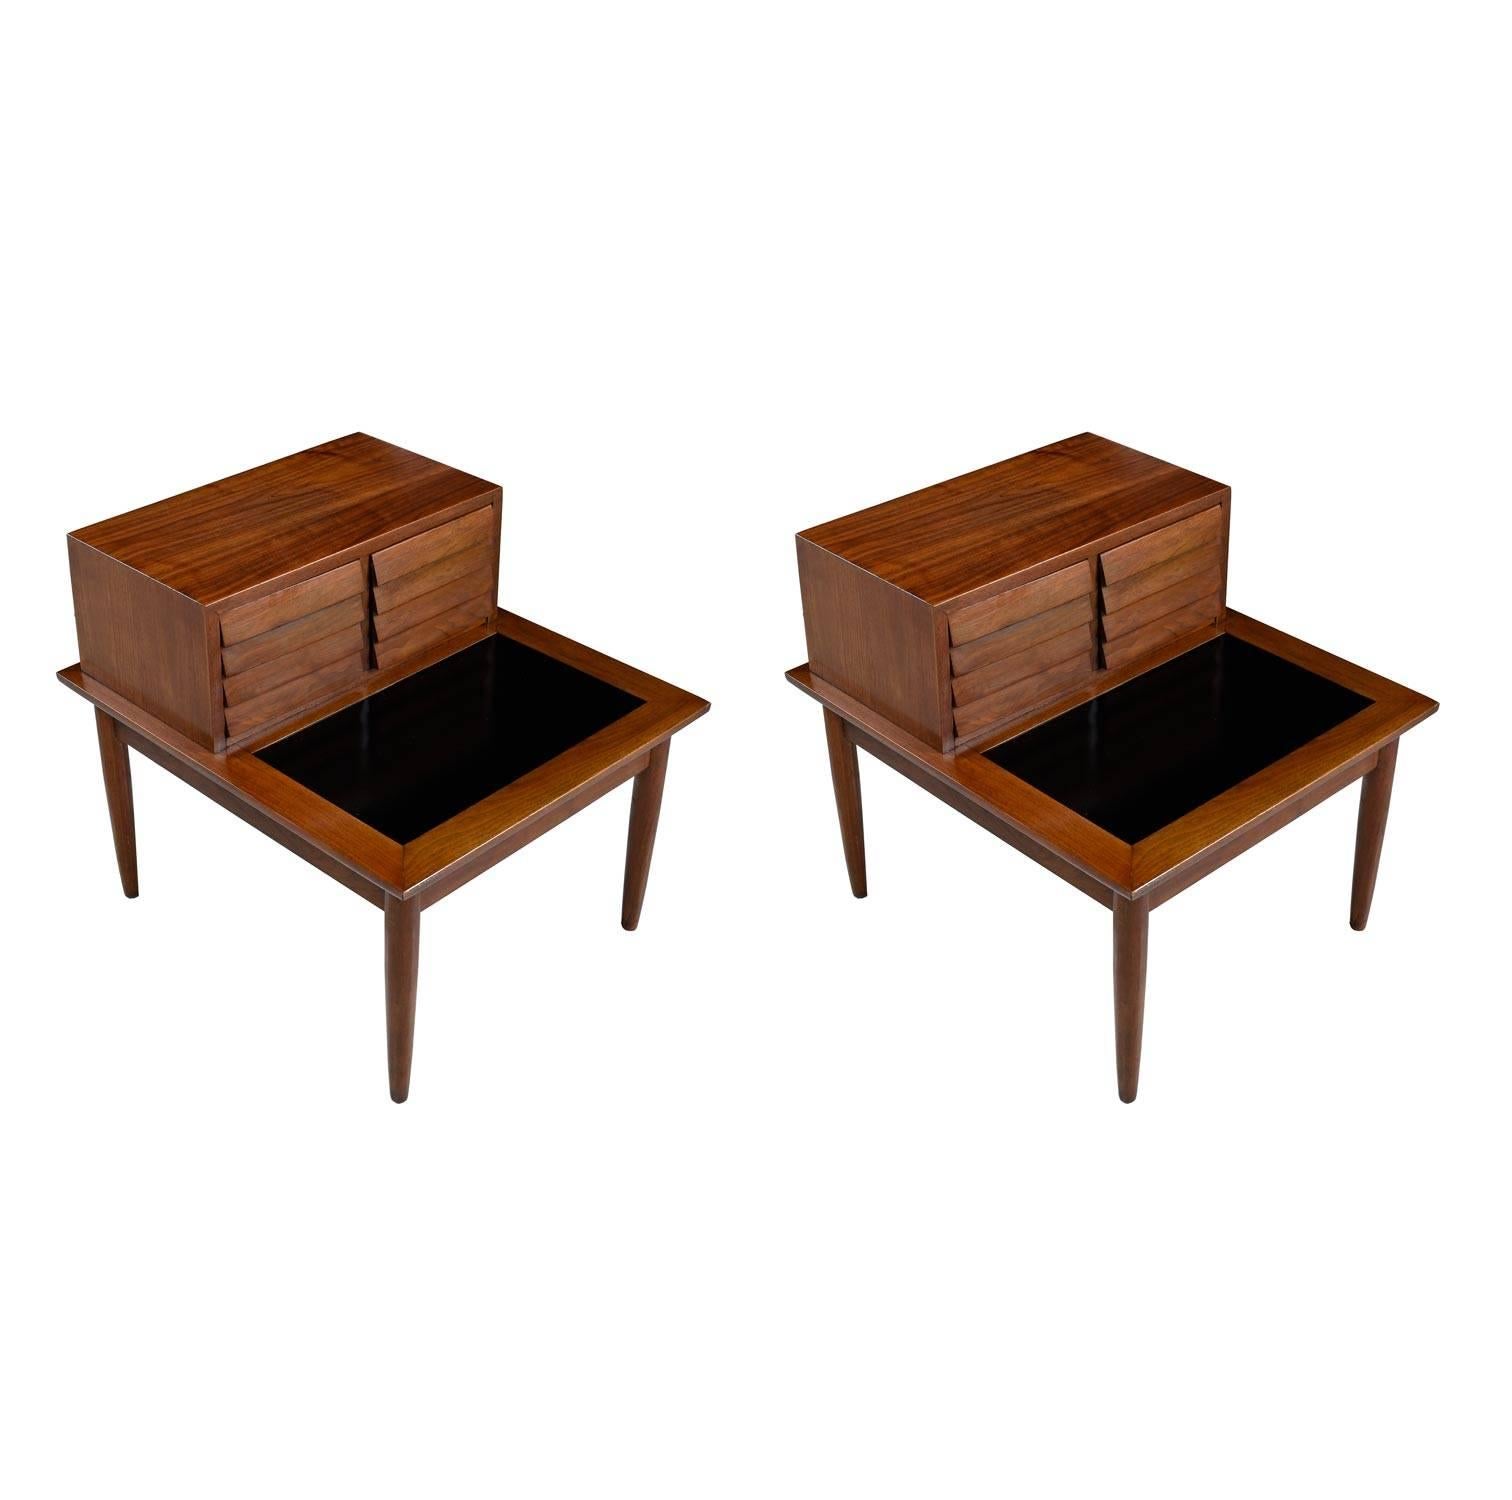 Pair of professionally refinished Dania lamp tables by American of Martinsville. One of the most celebrated lines of the Mid-Century Modern era. Designed by Merton Gershun, this set of Dania nightstands features Danish inspired Minimalist styling